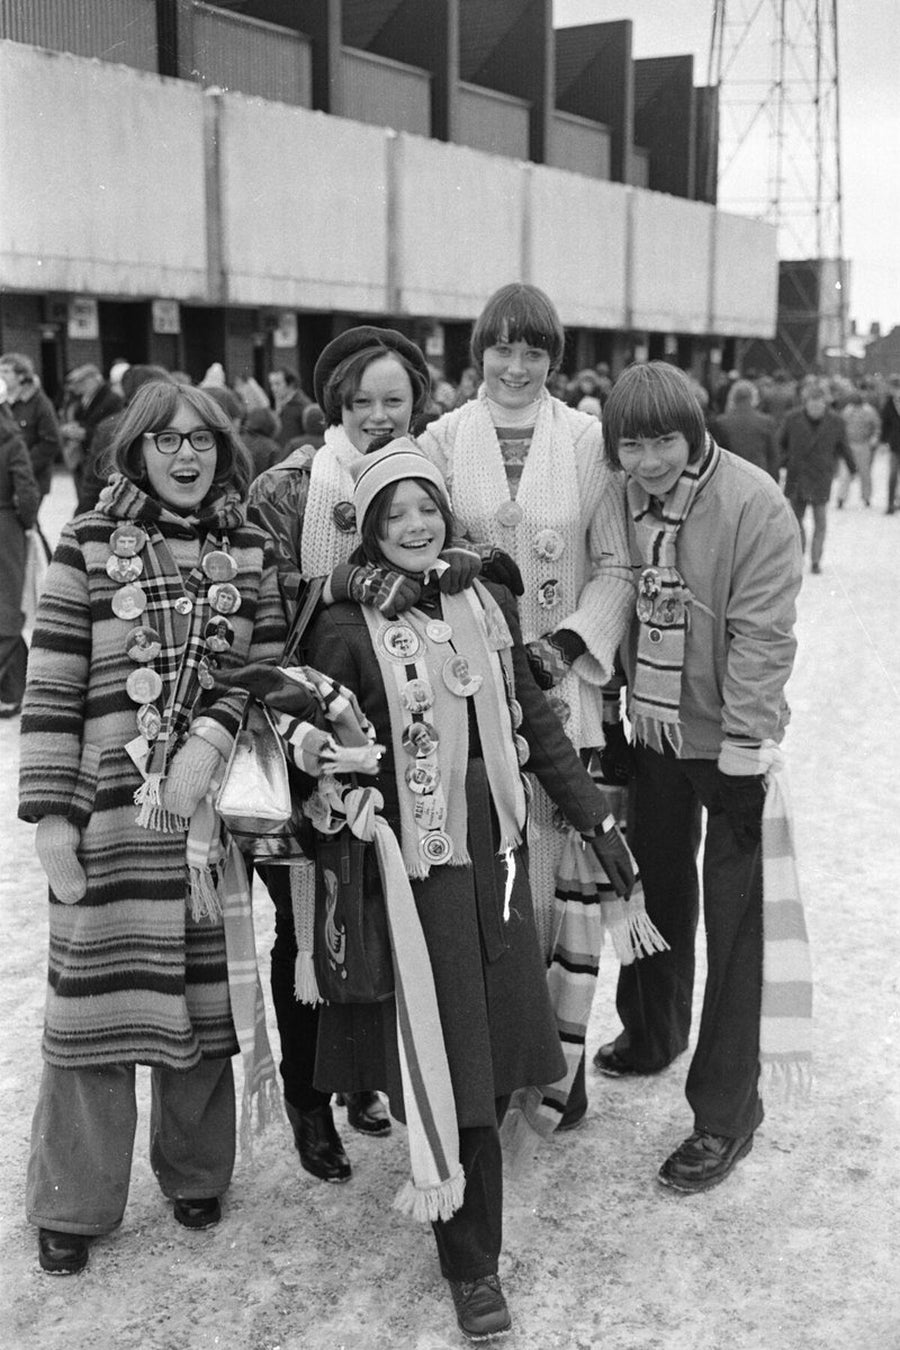 Manchester City Fans Outside the Stadium by Iain SP Reid  - c. 1976